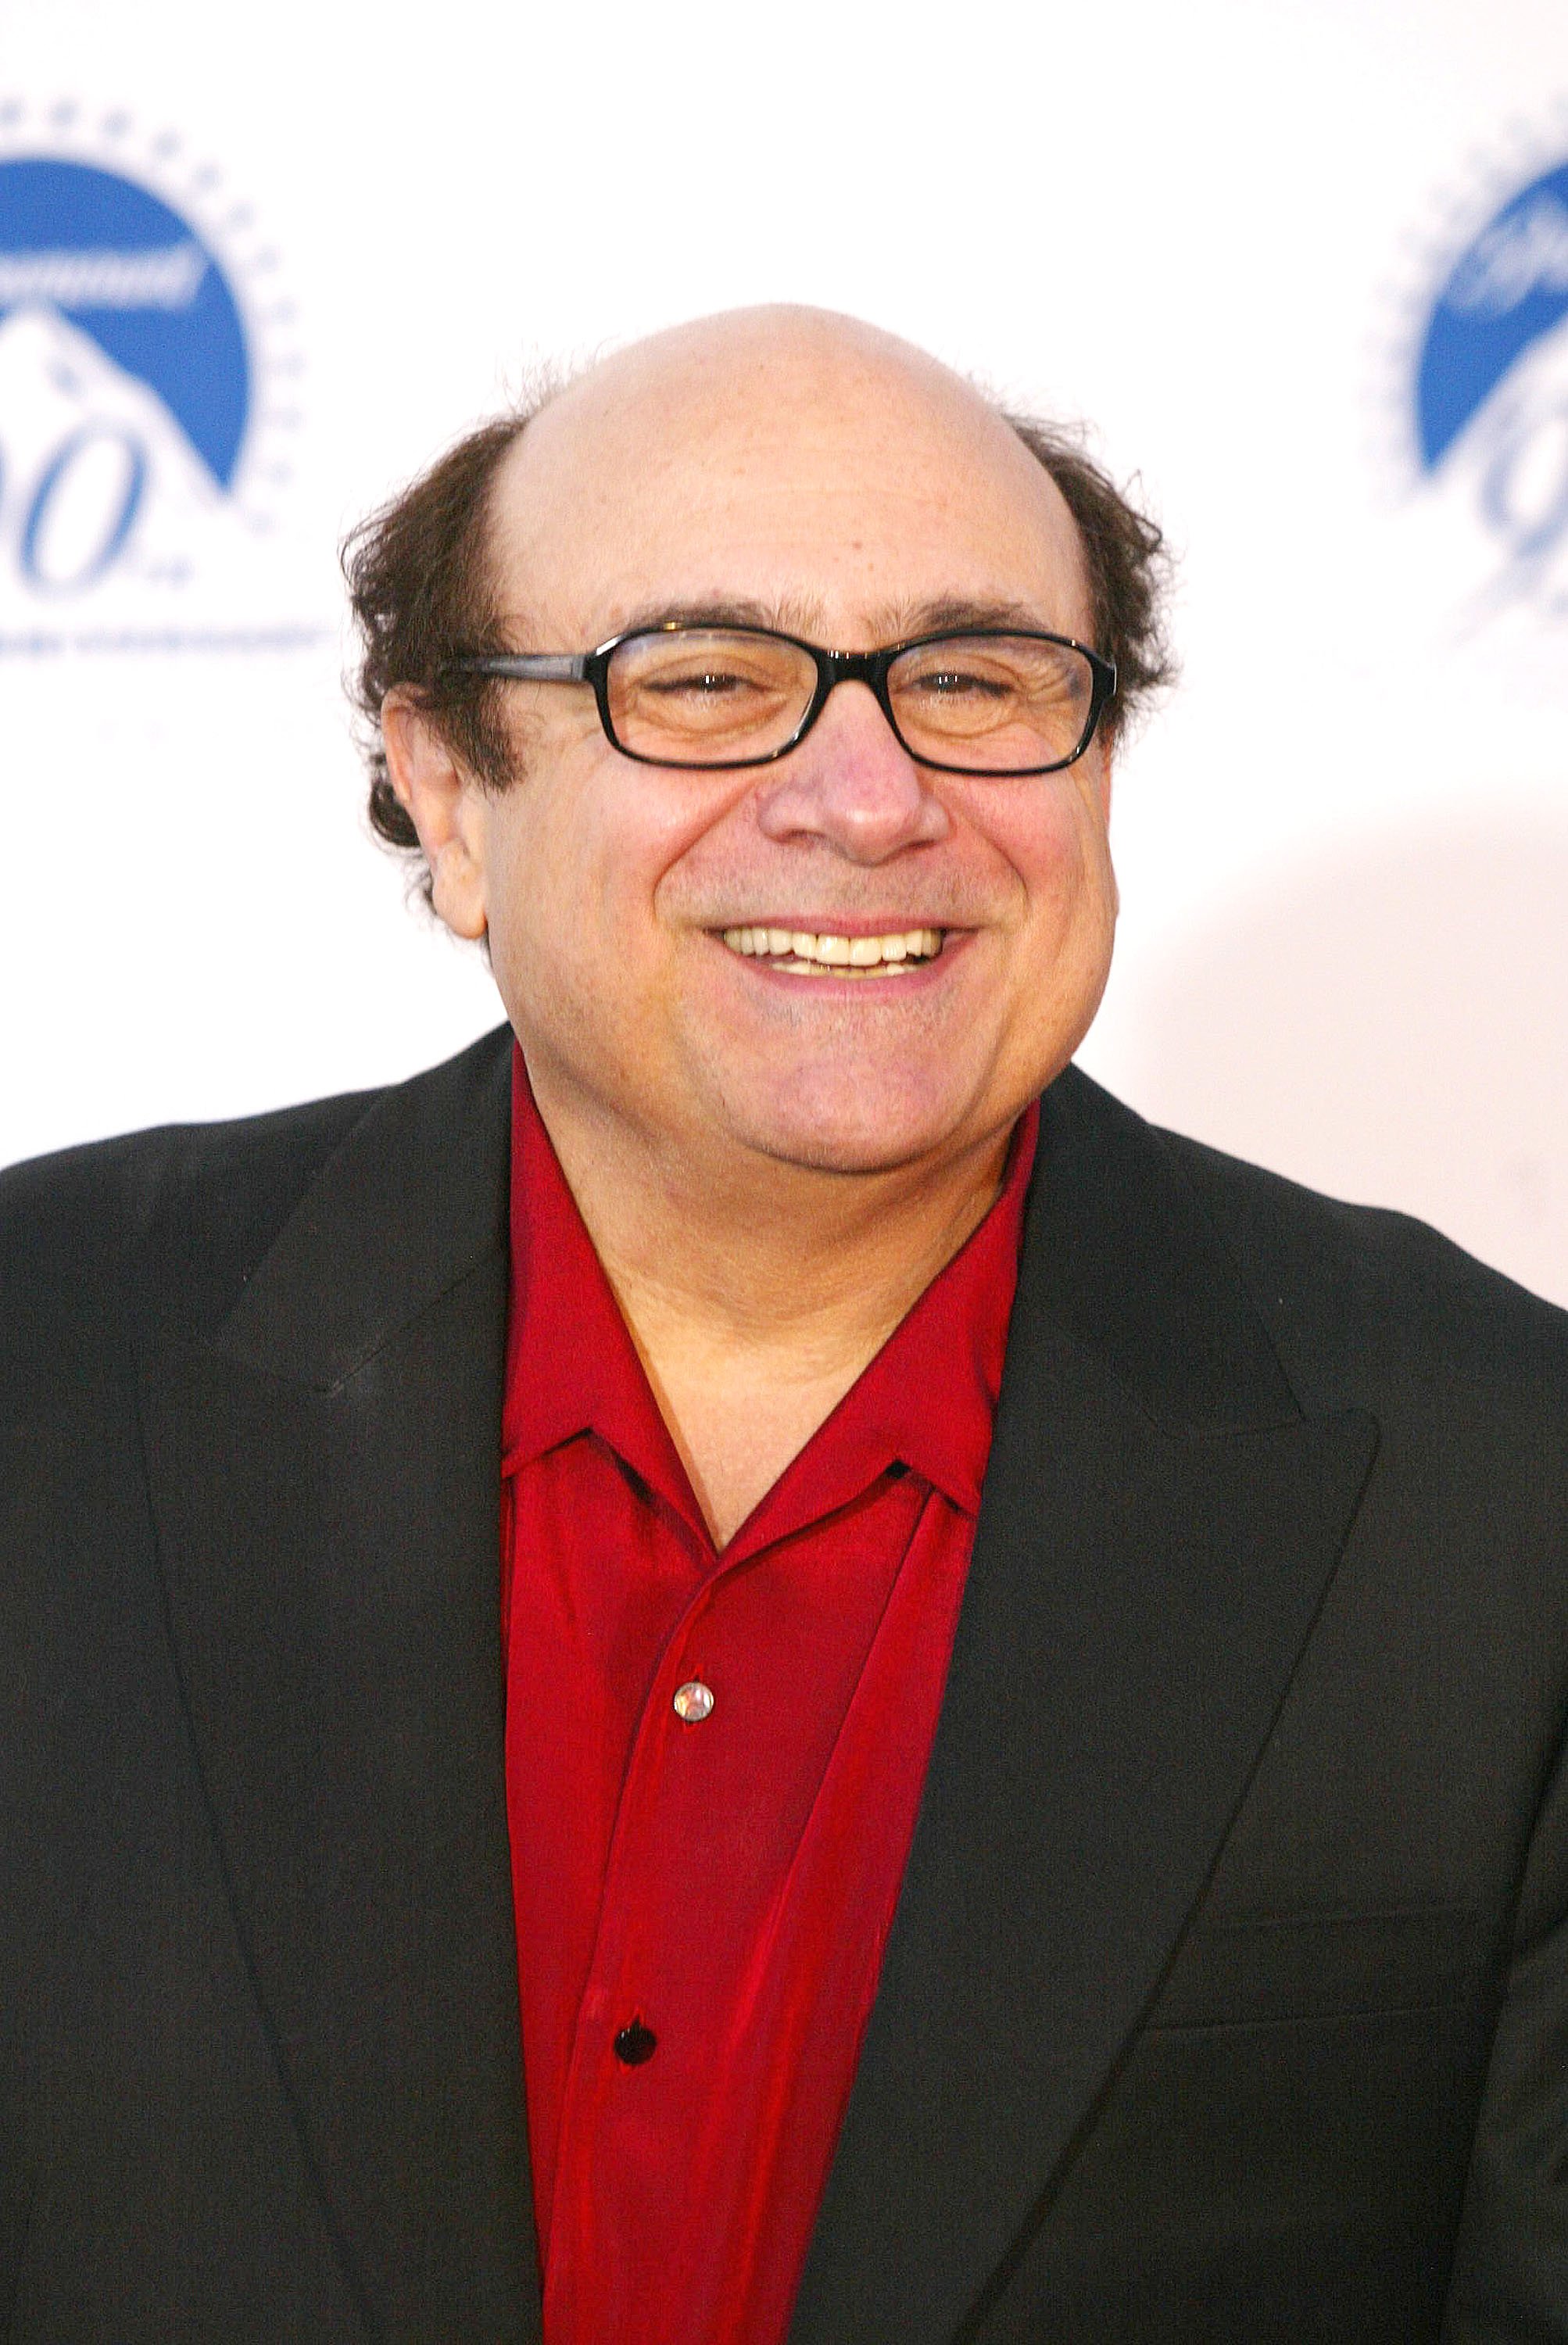 Danny DeVito at Paramount Picture's 90th Anniversary celebration "90 Stars for 90 Years" at Paramount Studios in Hollywood, Ca. Sunday, July 14, 2002. | Source: Getty Images.